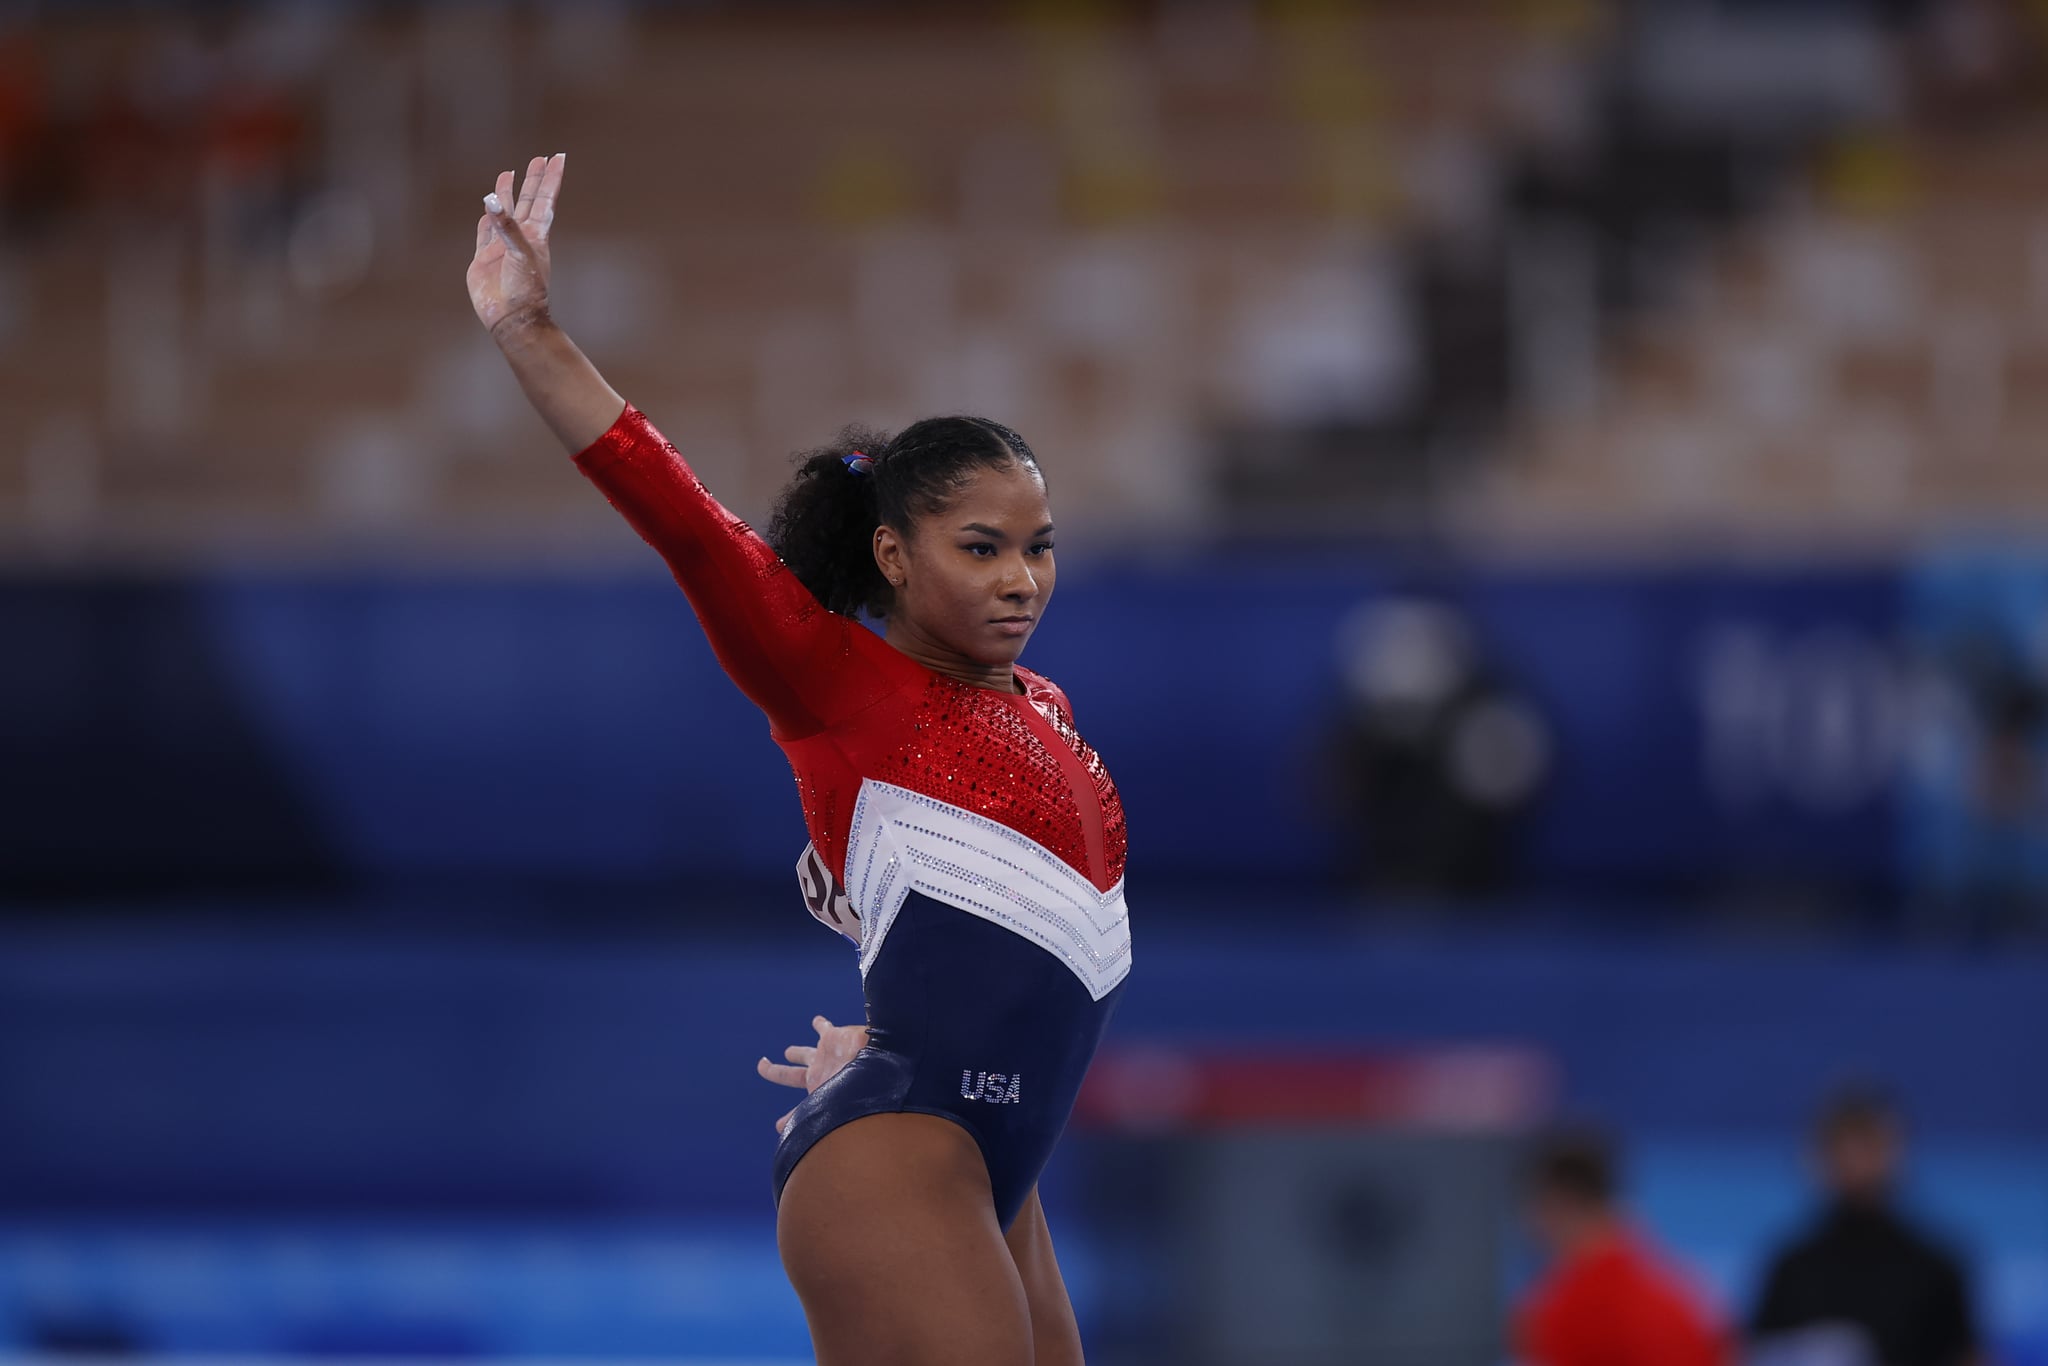 TOKYO, JAPAN - JULY 27: Jordan Chiles of Team United States competes on floor during the Women's team final on day four of the Tokyo 2020 Olympic Games at Ariake Gymnastics Centre on July 27, 2021 in Tokyo, Japan. (Photo by Fred Lee/Getty Images)